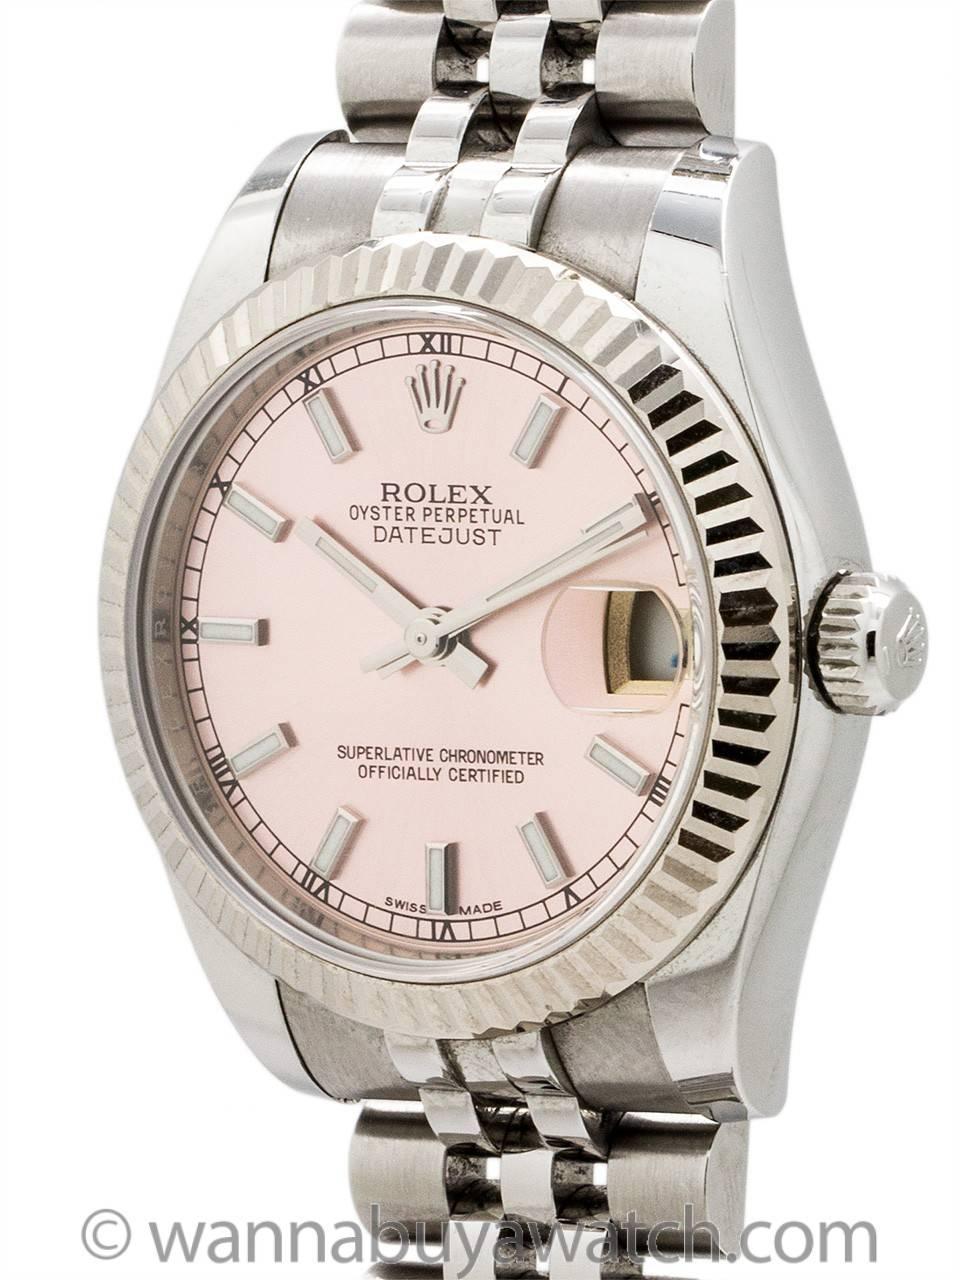 Rolex Datejust Midsize Stainless ref 178274 random serial# circa 2015. New style 6 digit reference #, 31mm diameter bolder and more massive case with 18K WG fluted bezel, sapphire crystal, popular pink ice factory dial. Powered by self winding